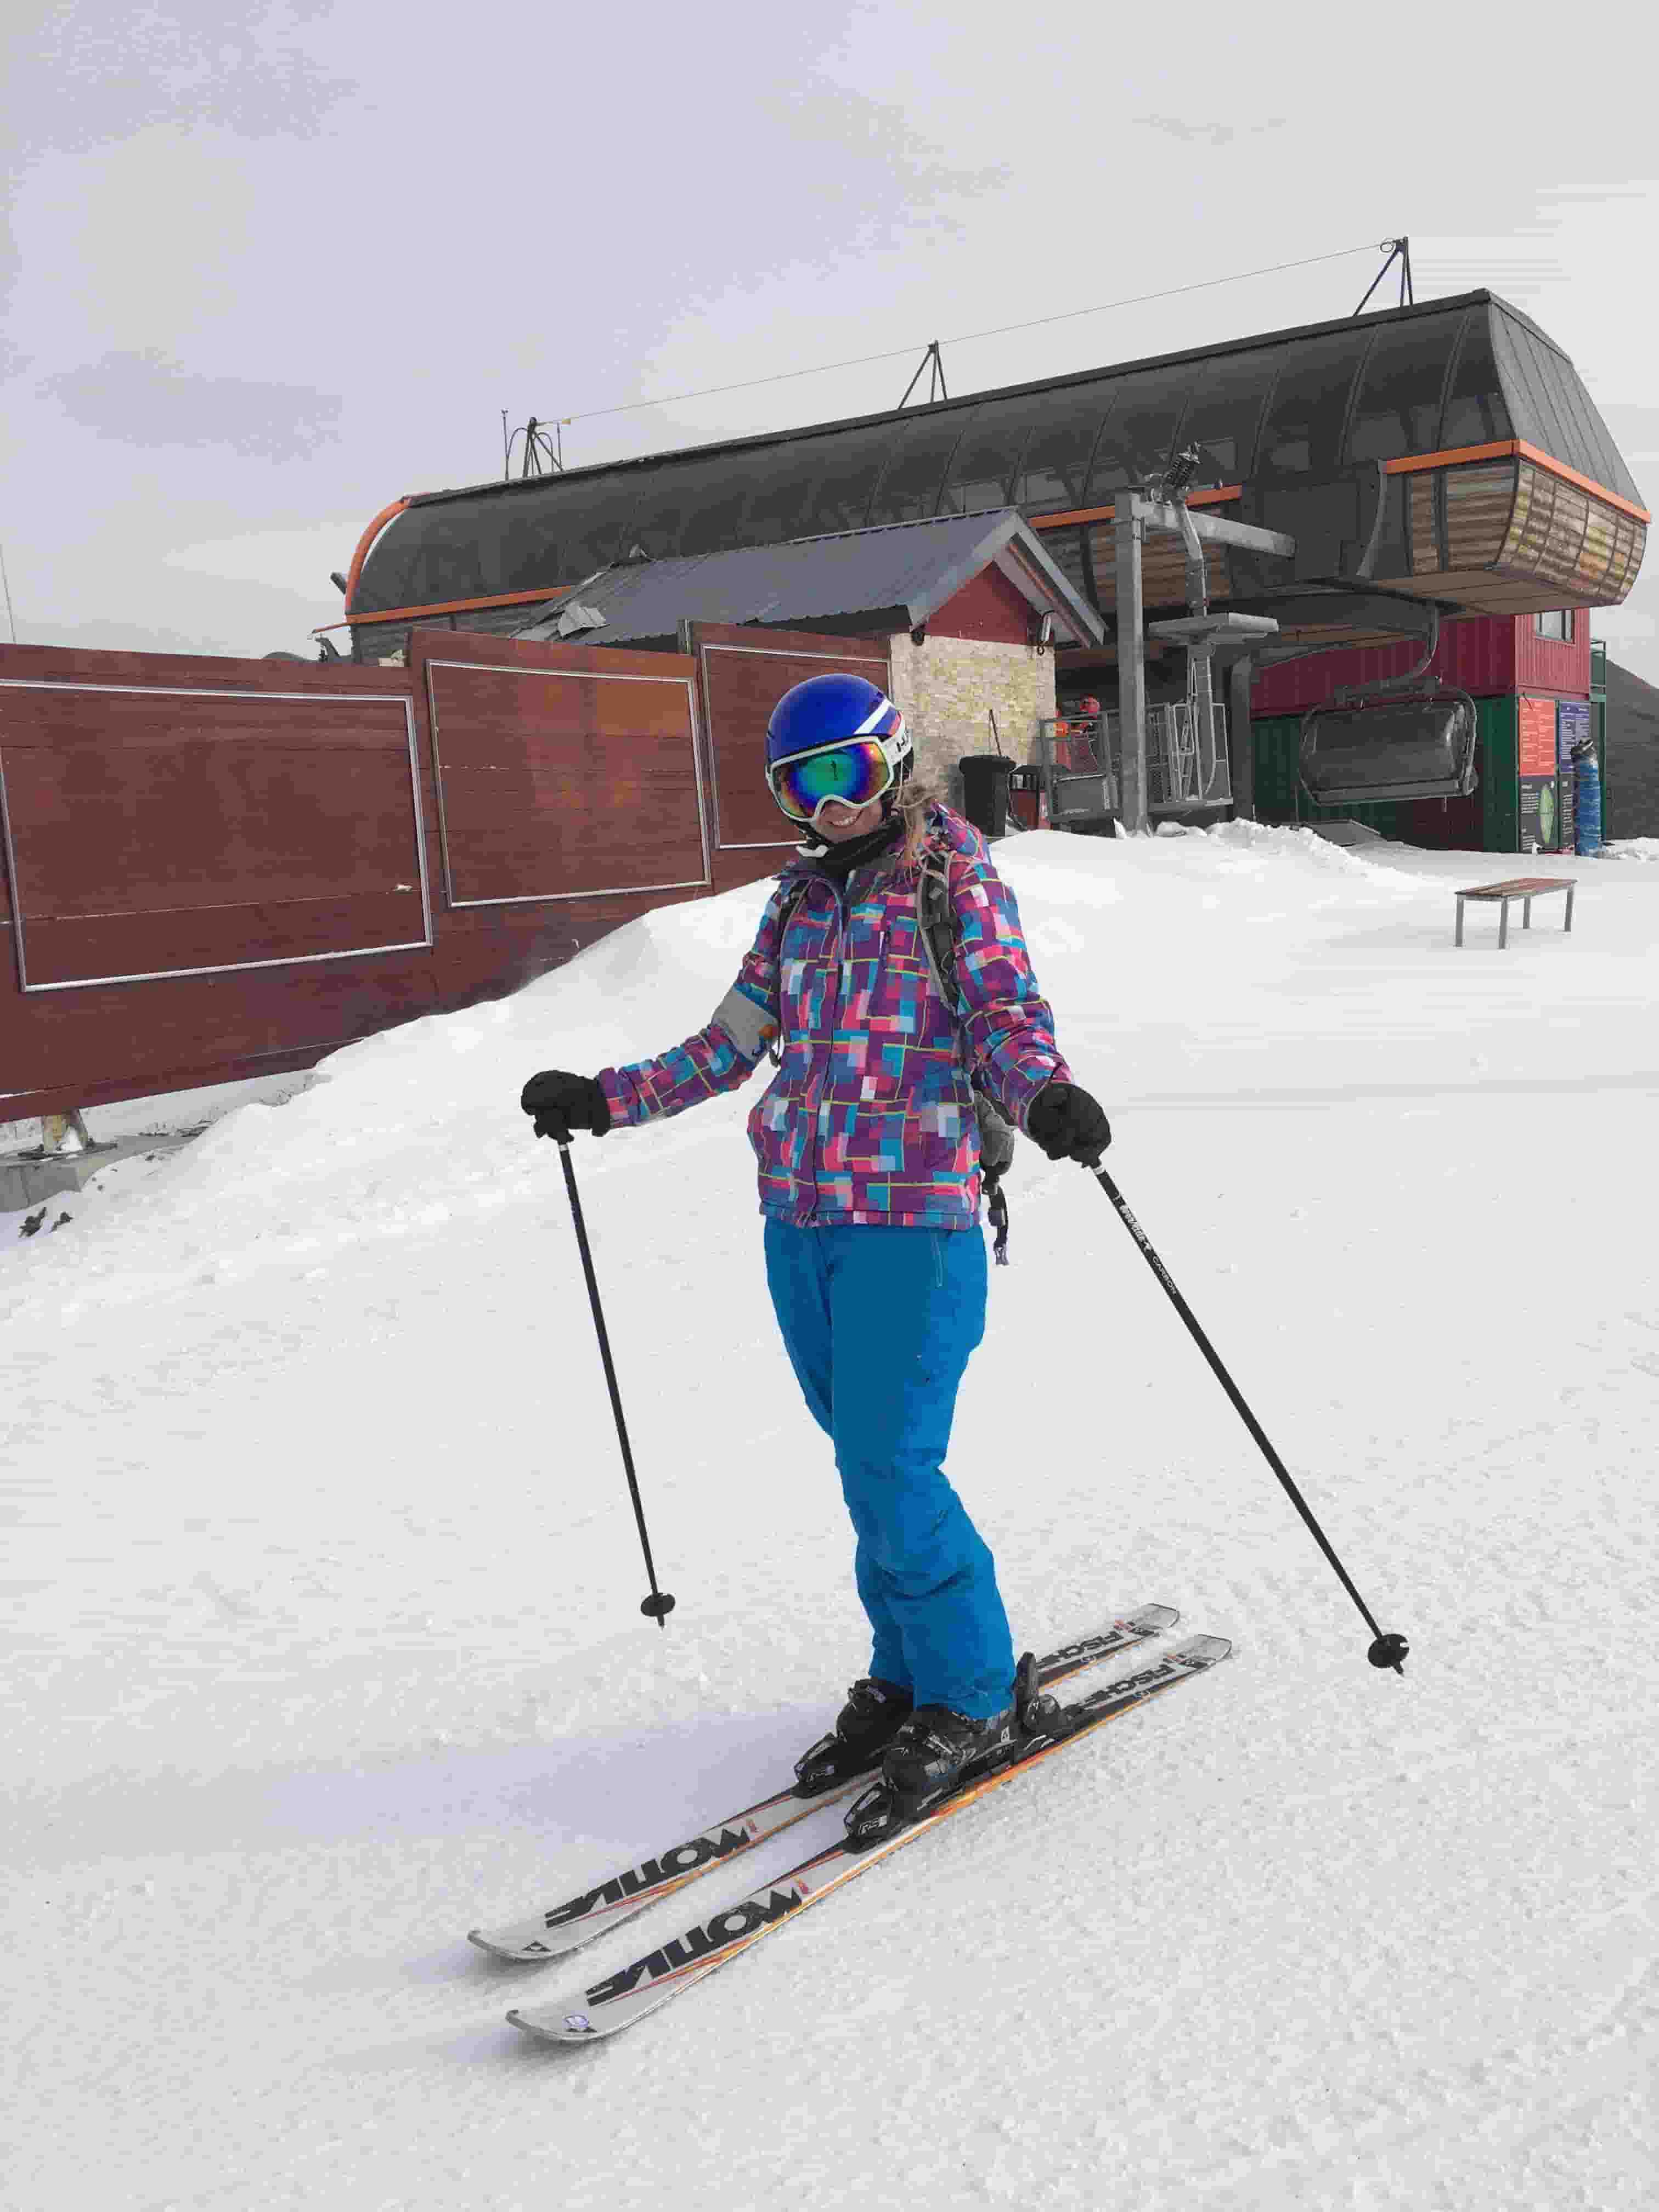 Skiing in China: LTL Student Indie on the slopes